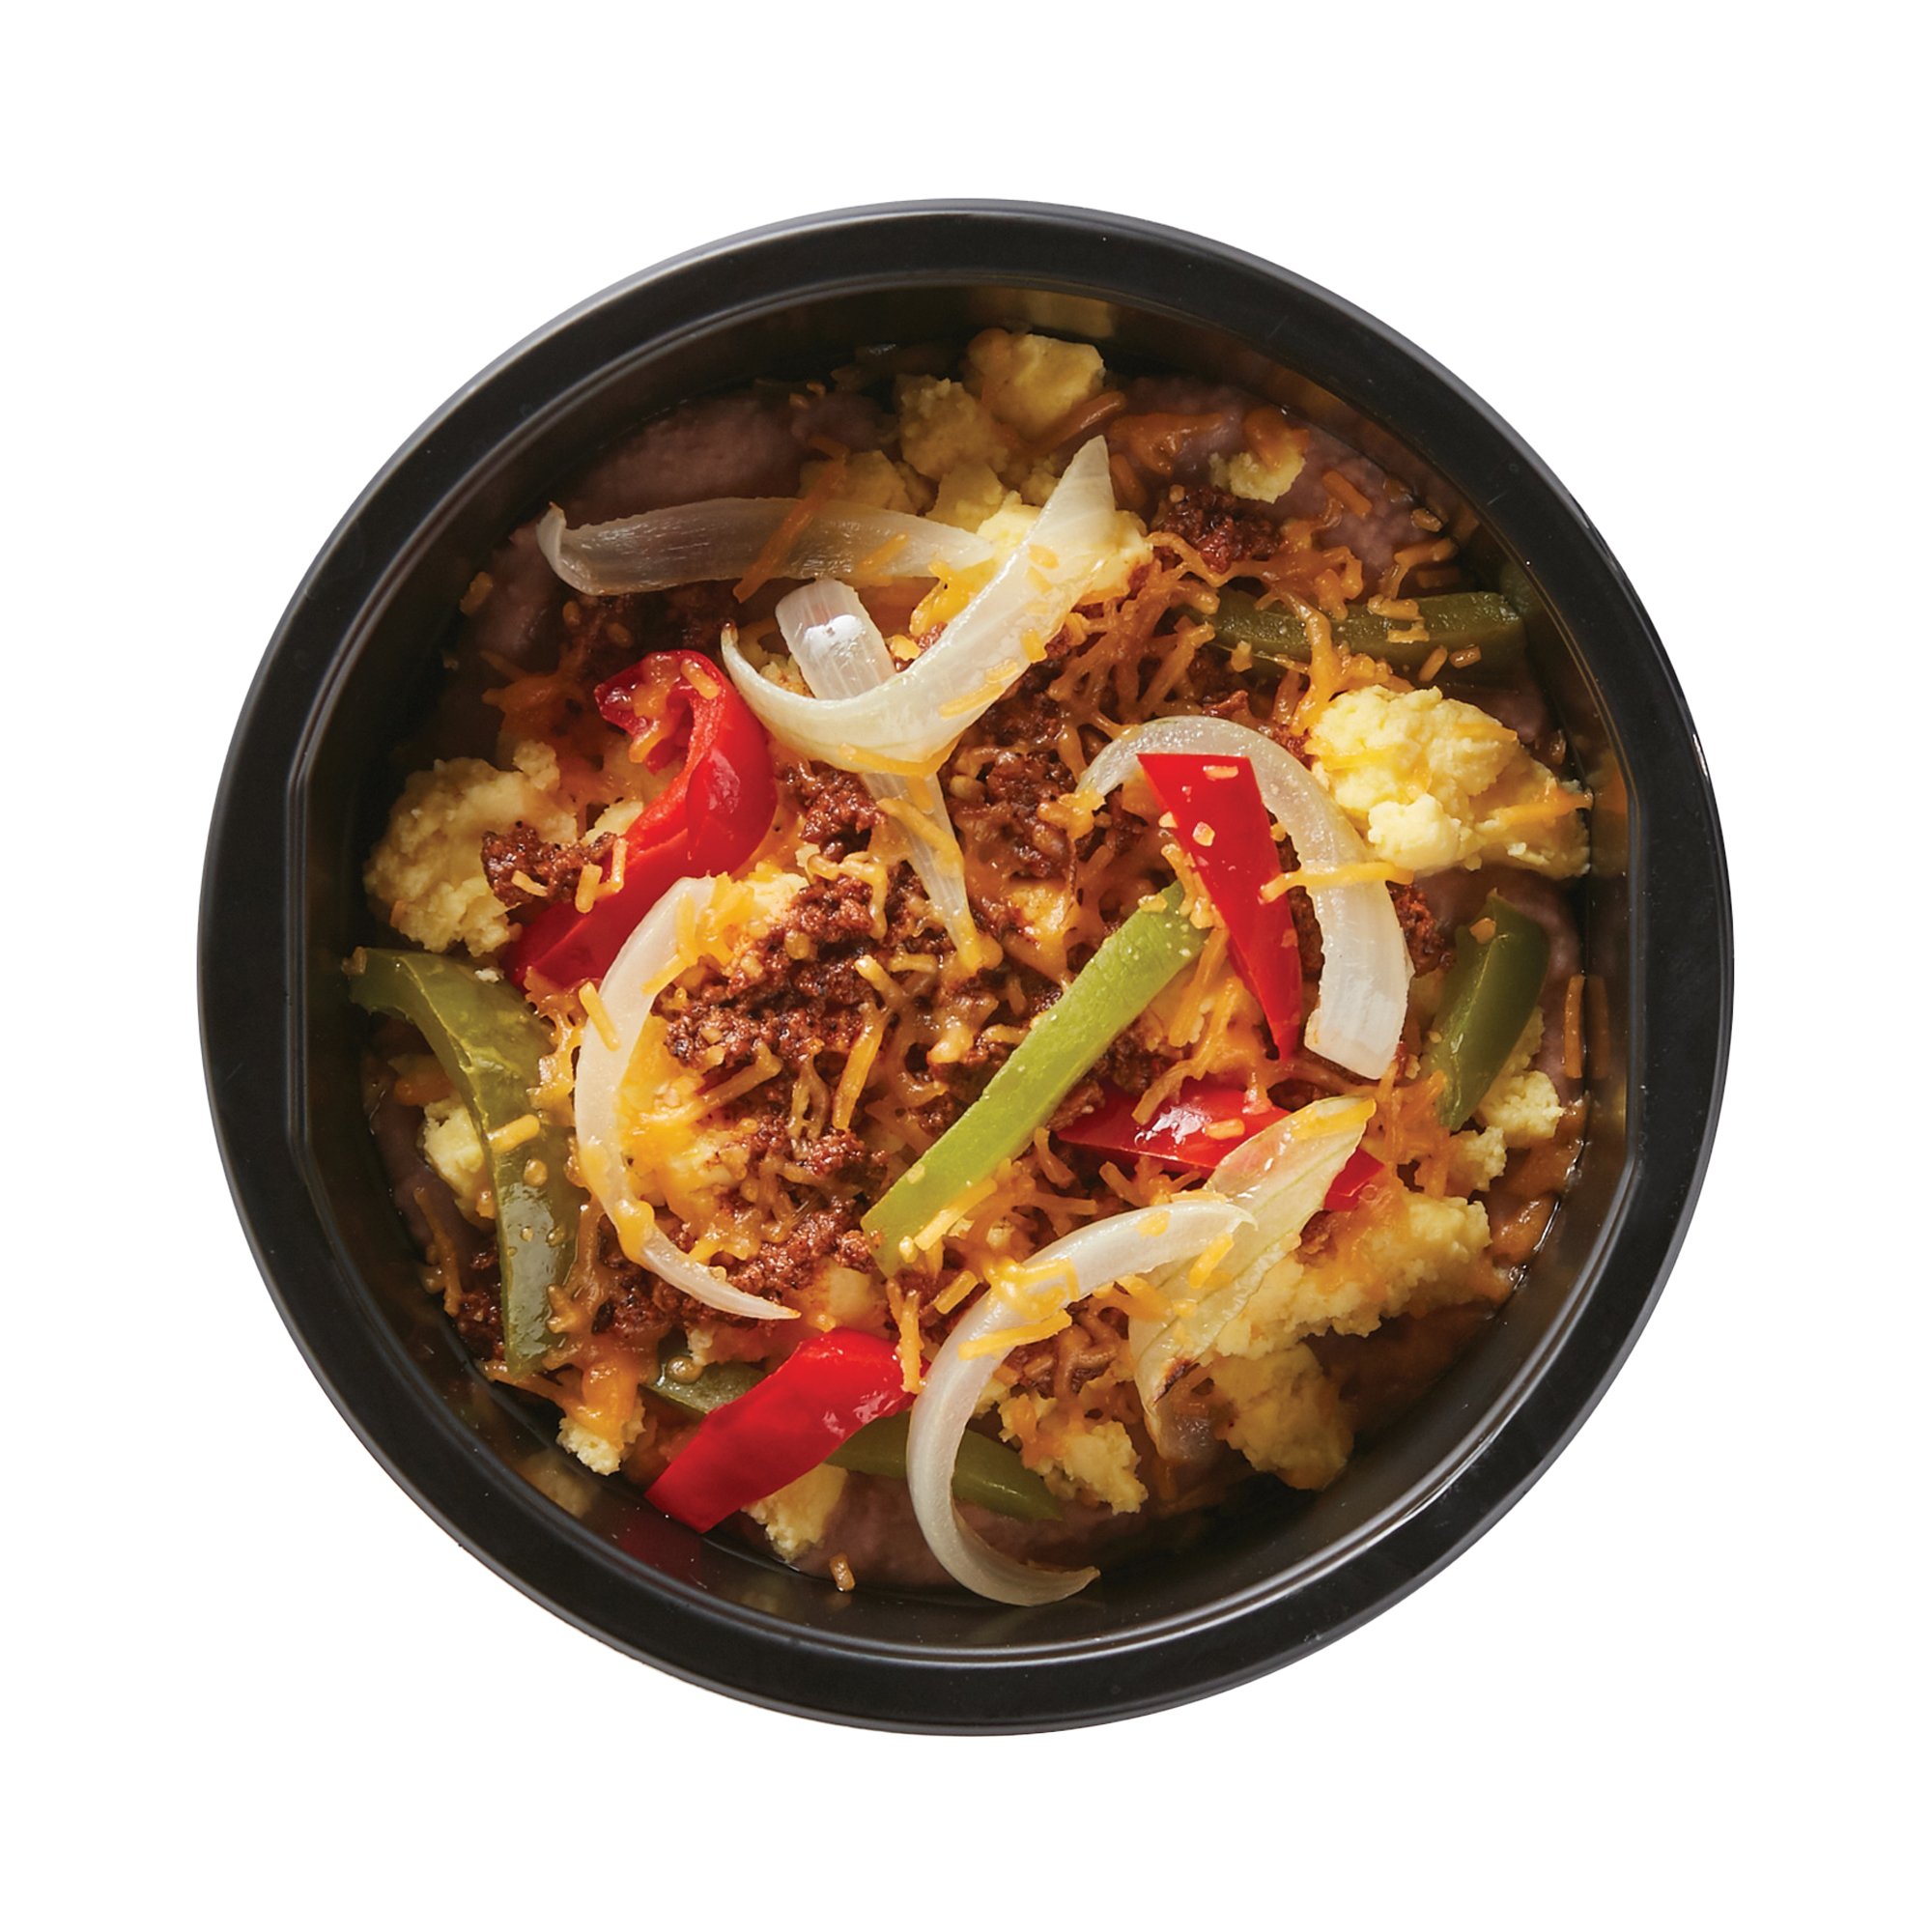 Meal Simple by H-E-B Tex-Mex Breakfast Bowl - Shop Entrees & Sides at H-E-B